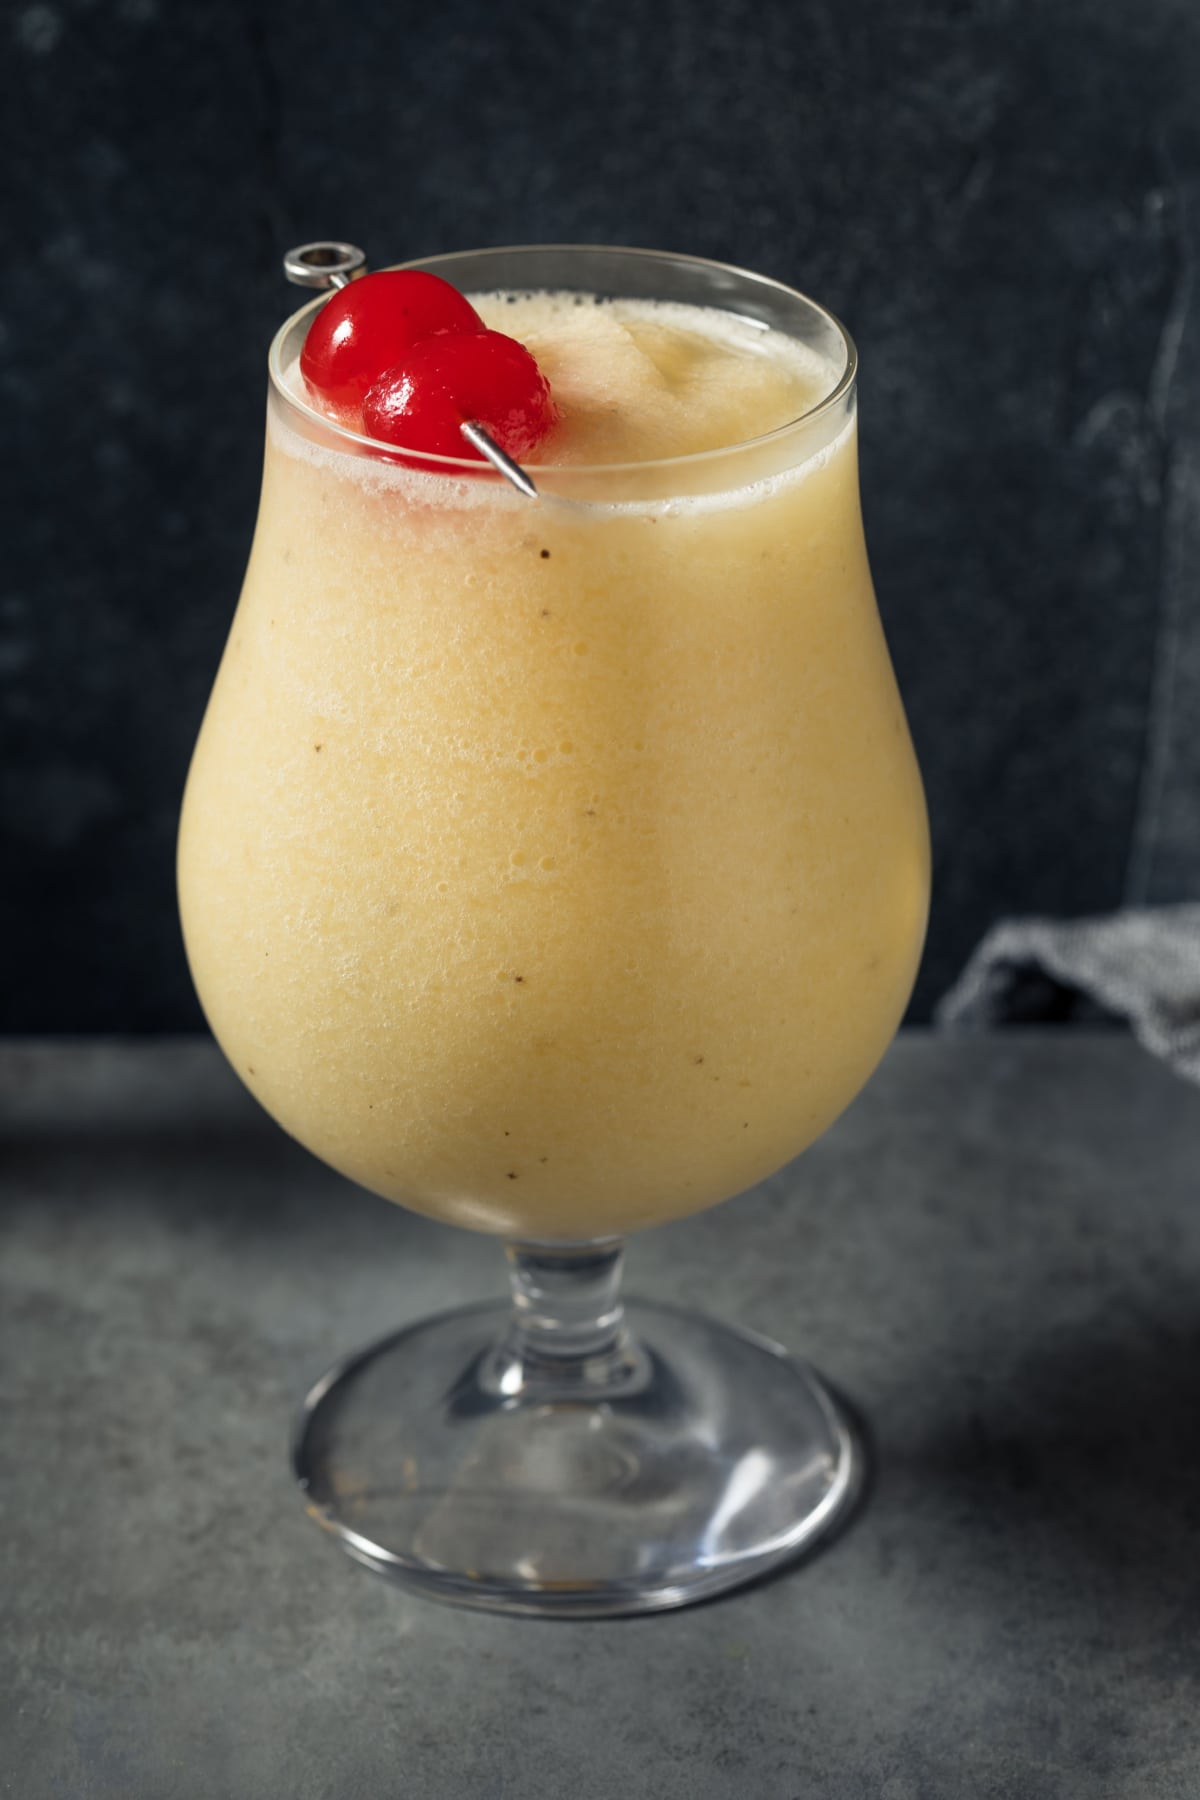 Front View of a Banana Daiquiri in a Tulip Glass with a Cherry on Top